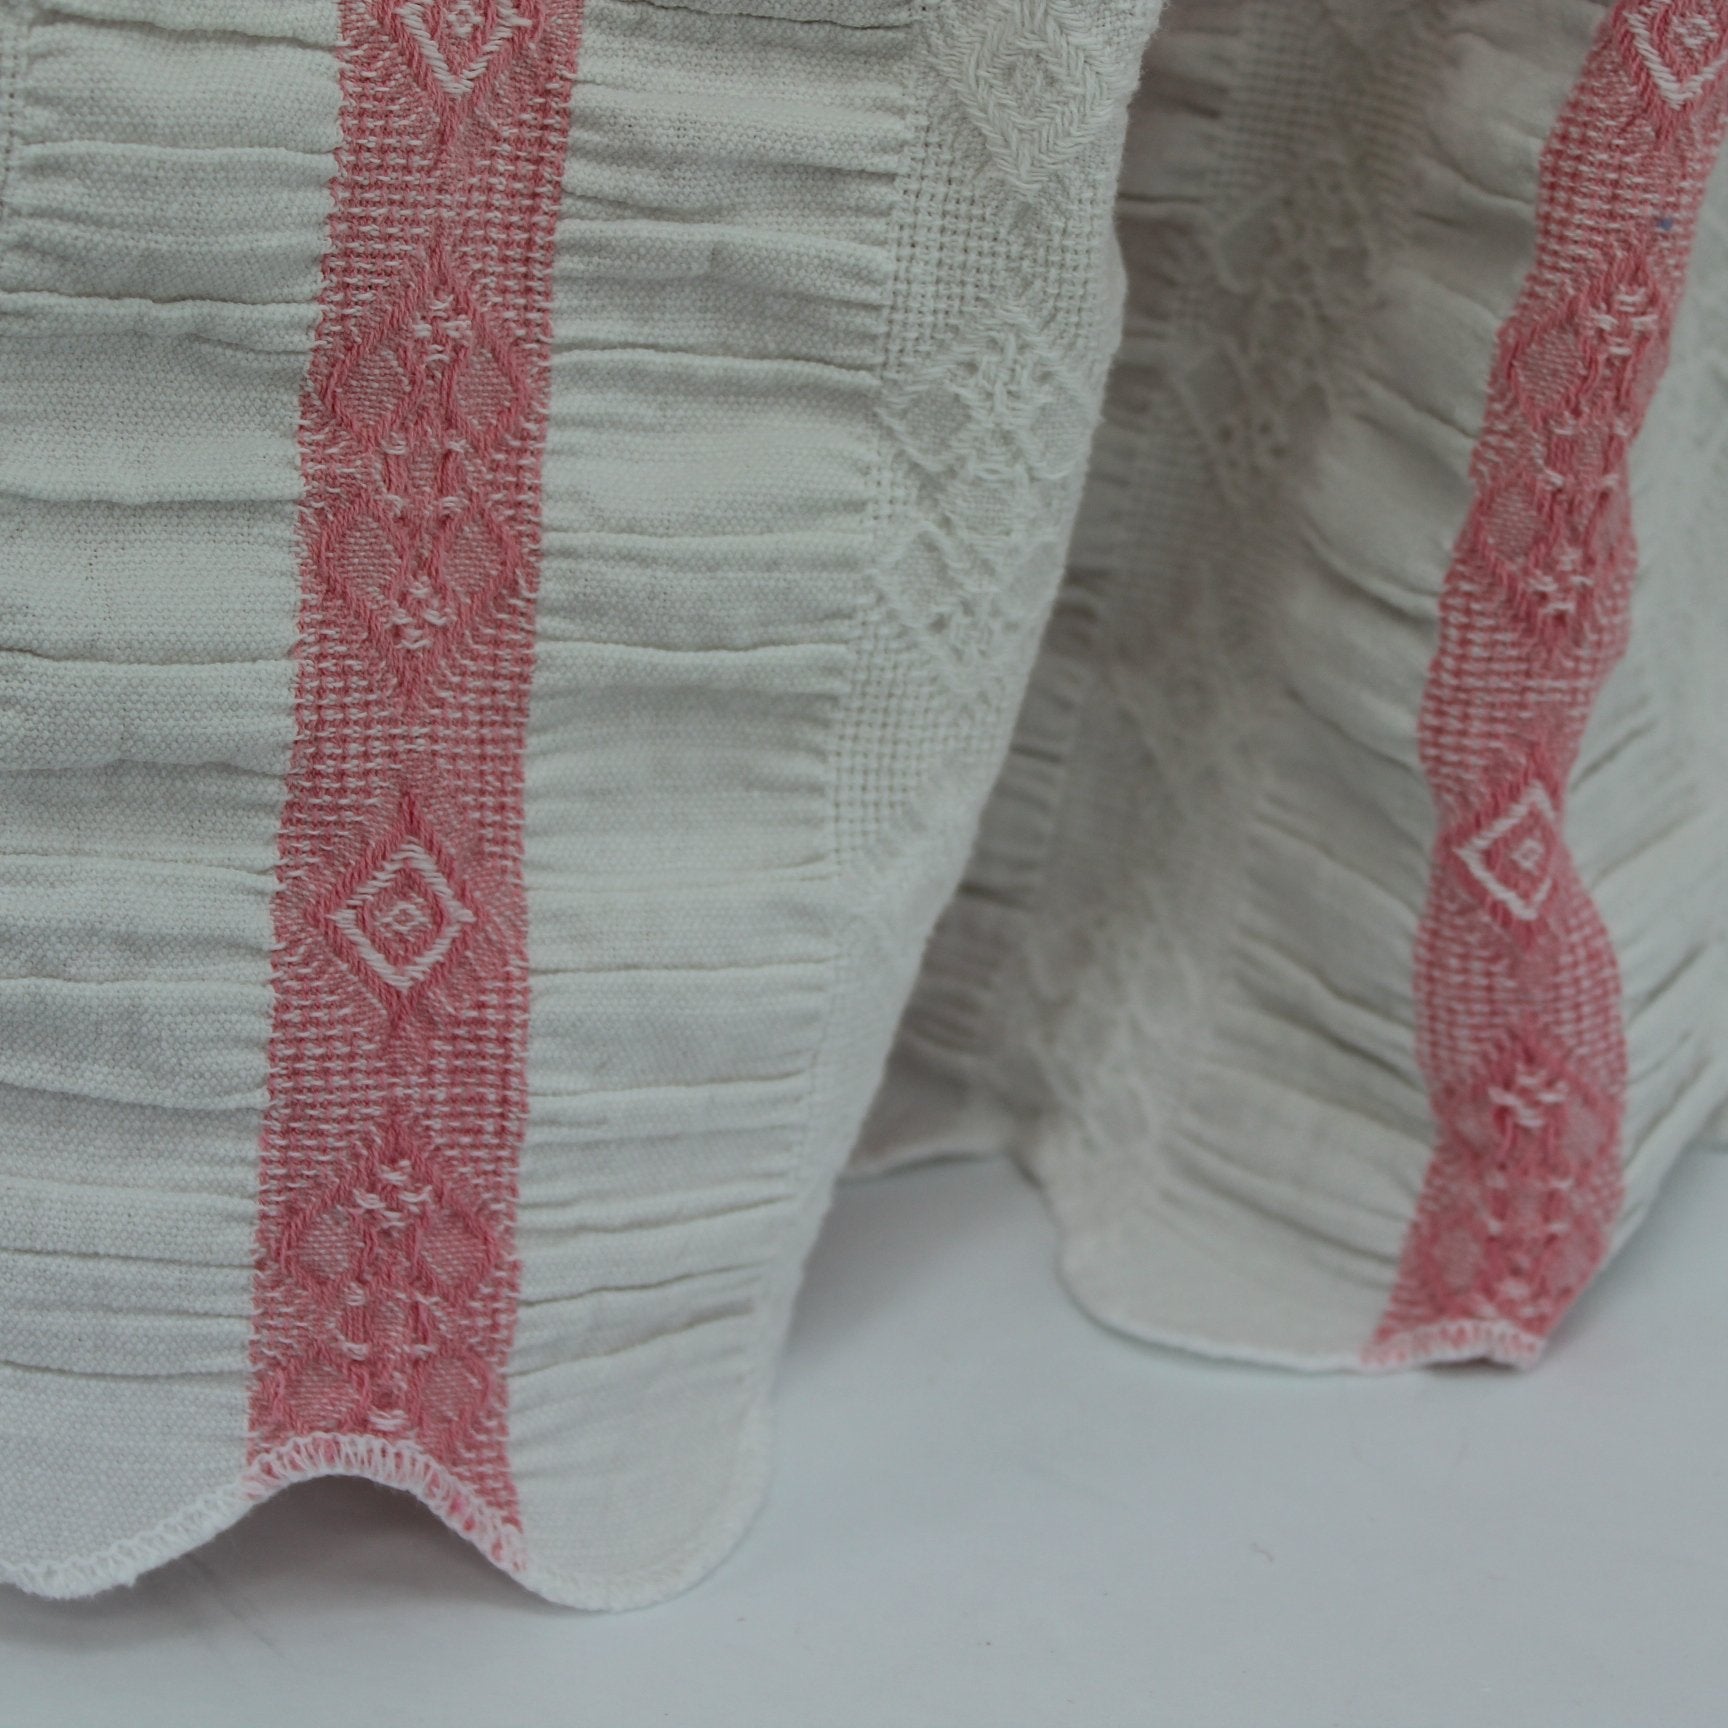 Unusual Ruched Cotton Coverlet Bedspread White Pink Woven Stripe Scalloped Use DIY closeup of scalloped hem